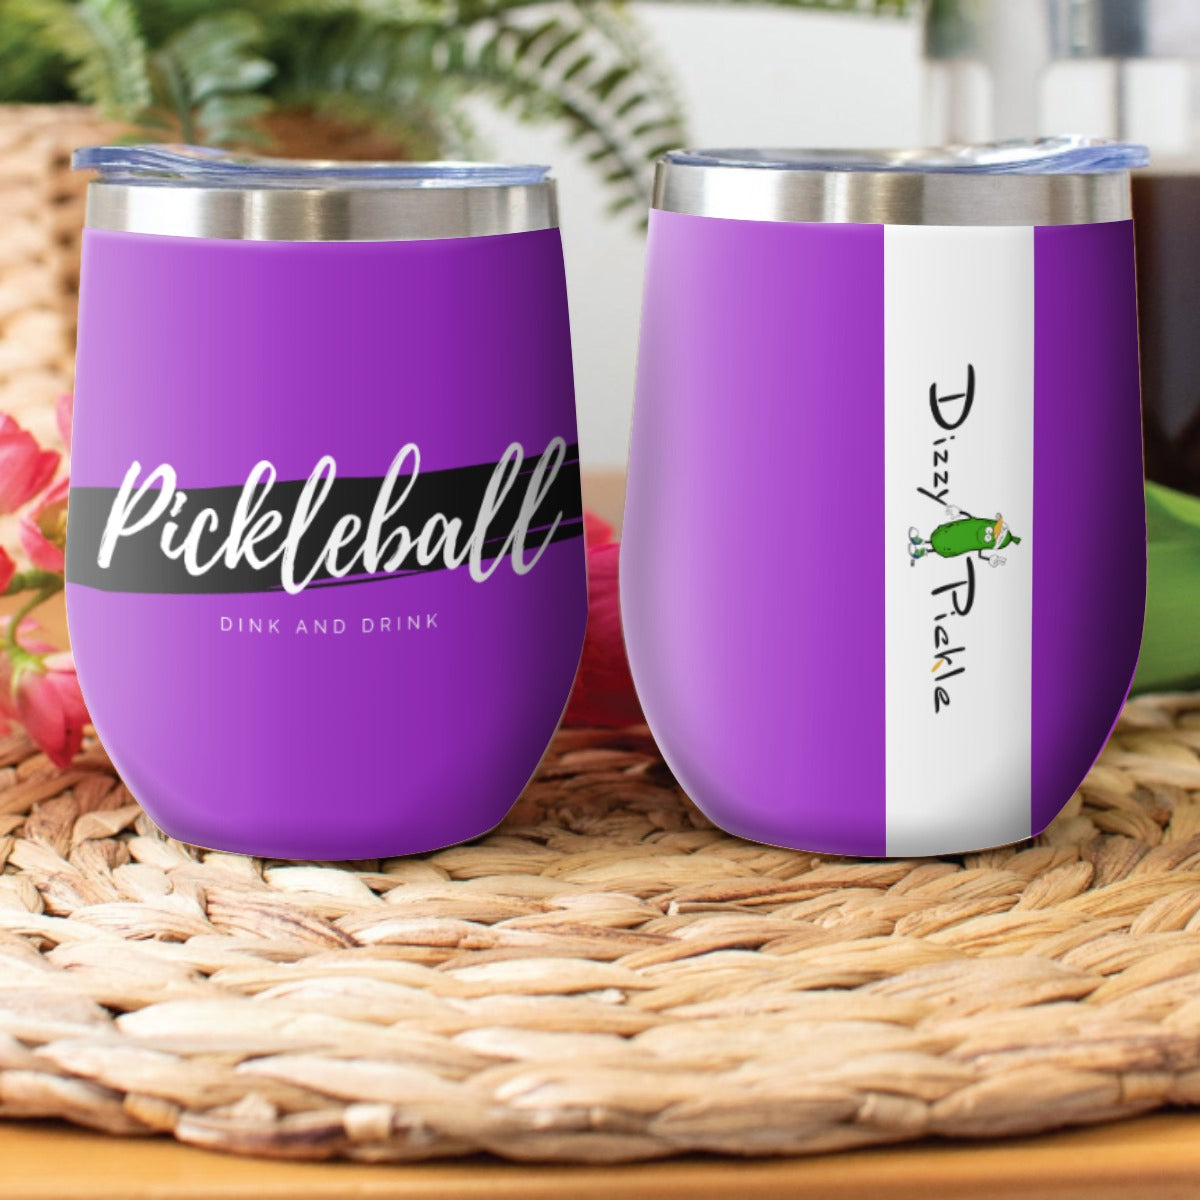 It's Swell - White - Pickleball Stainless Steel Wine Tumbler 12oz by Dizzy  Pickle